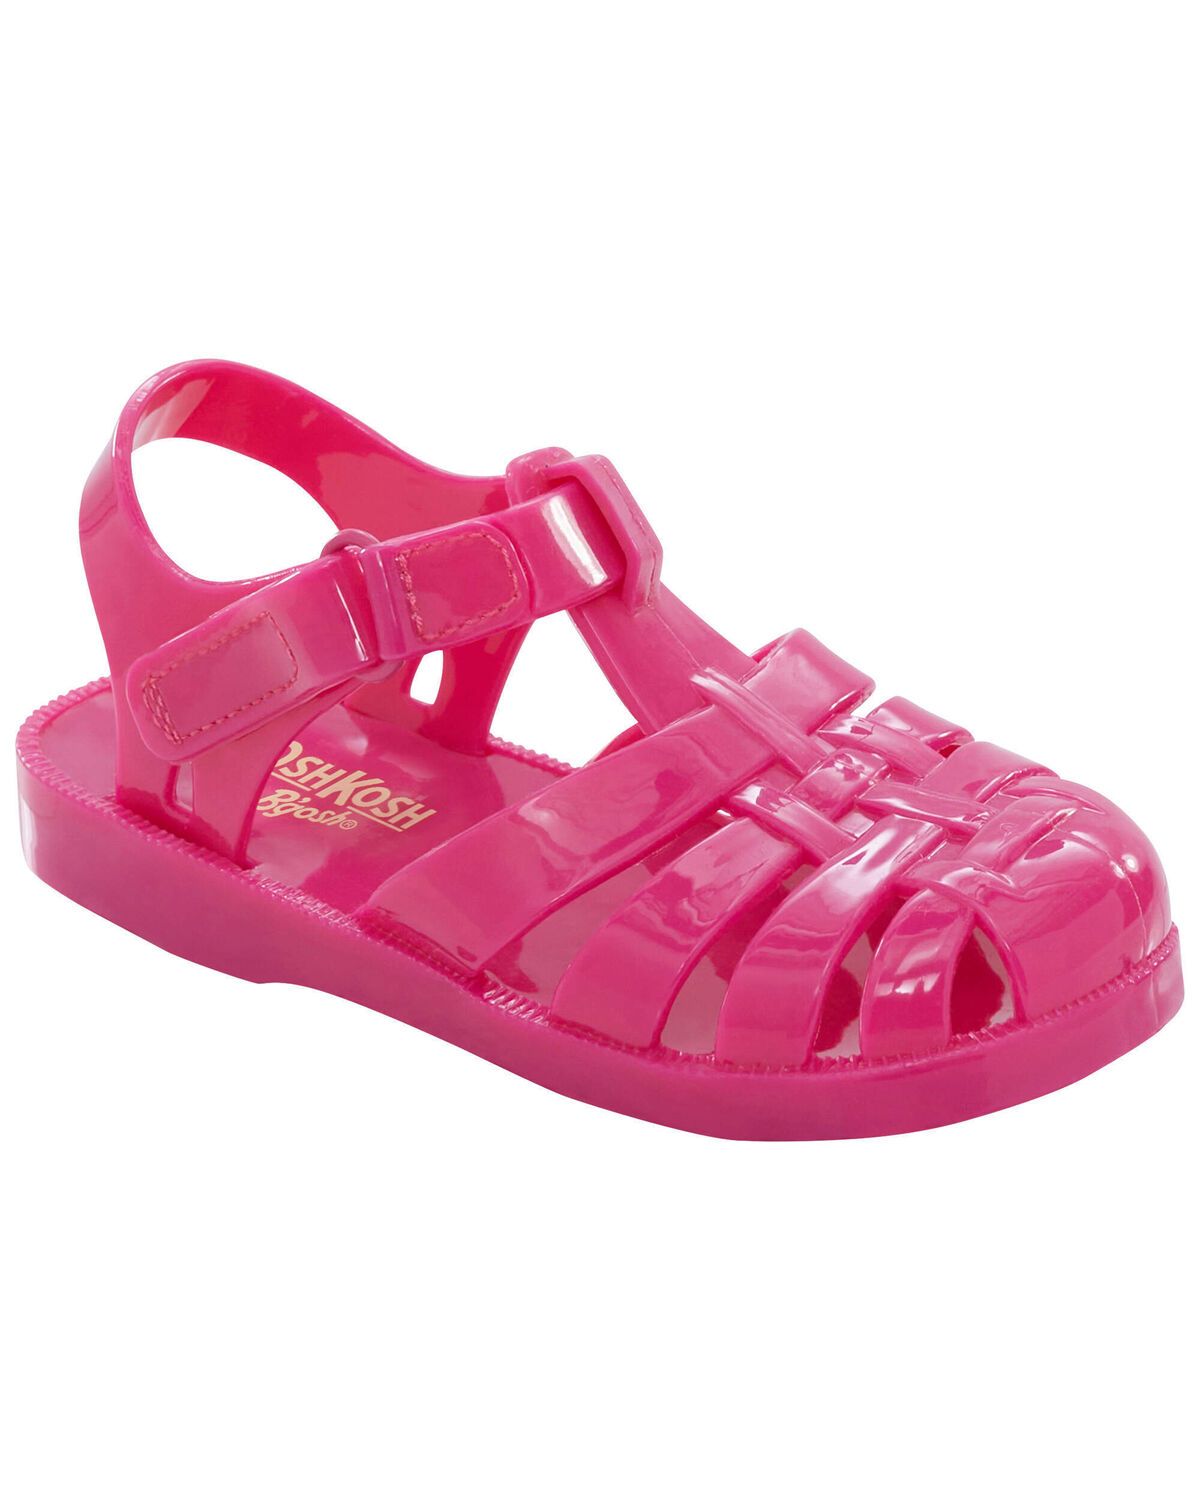 Toddler Jelly Sandals | Carter's